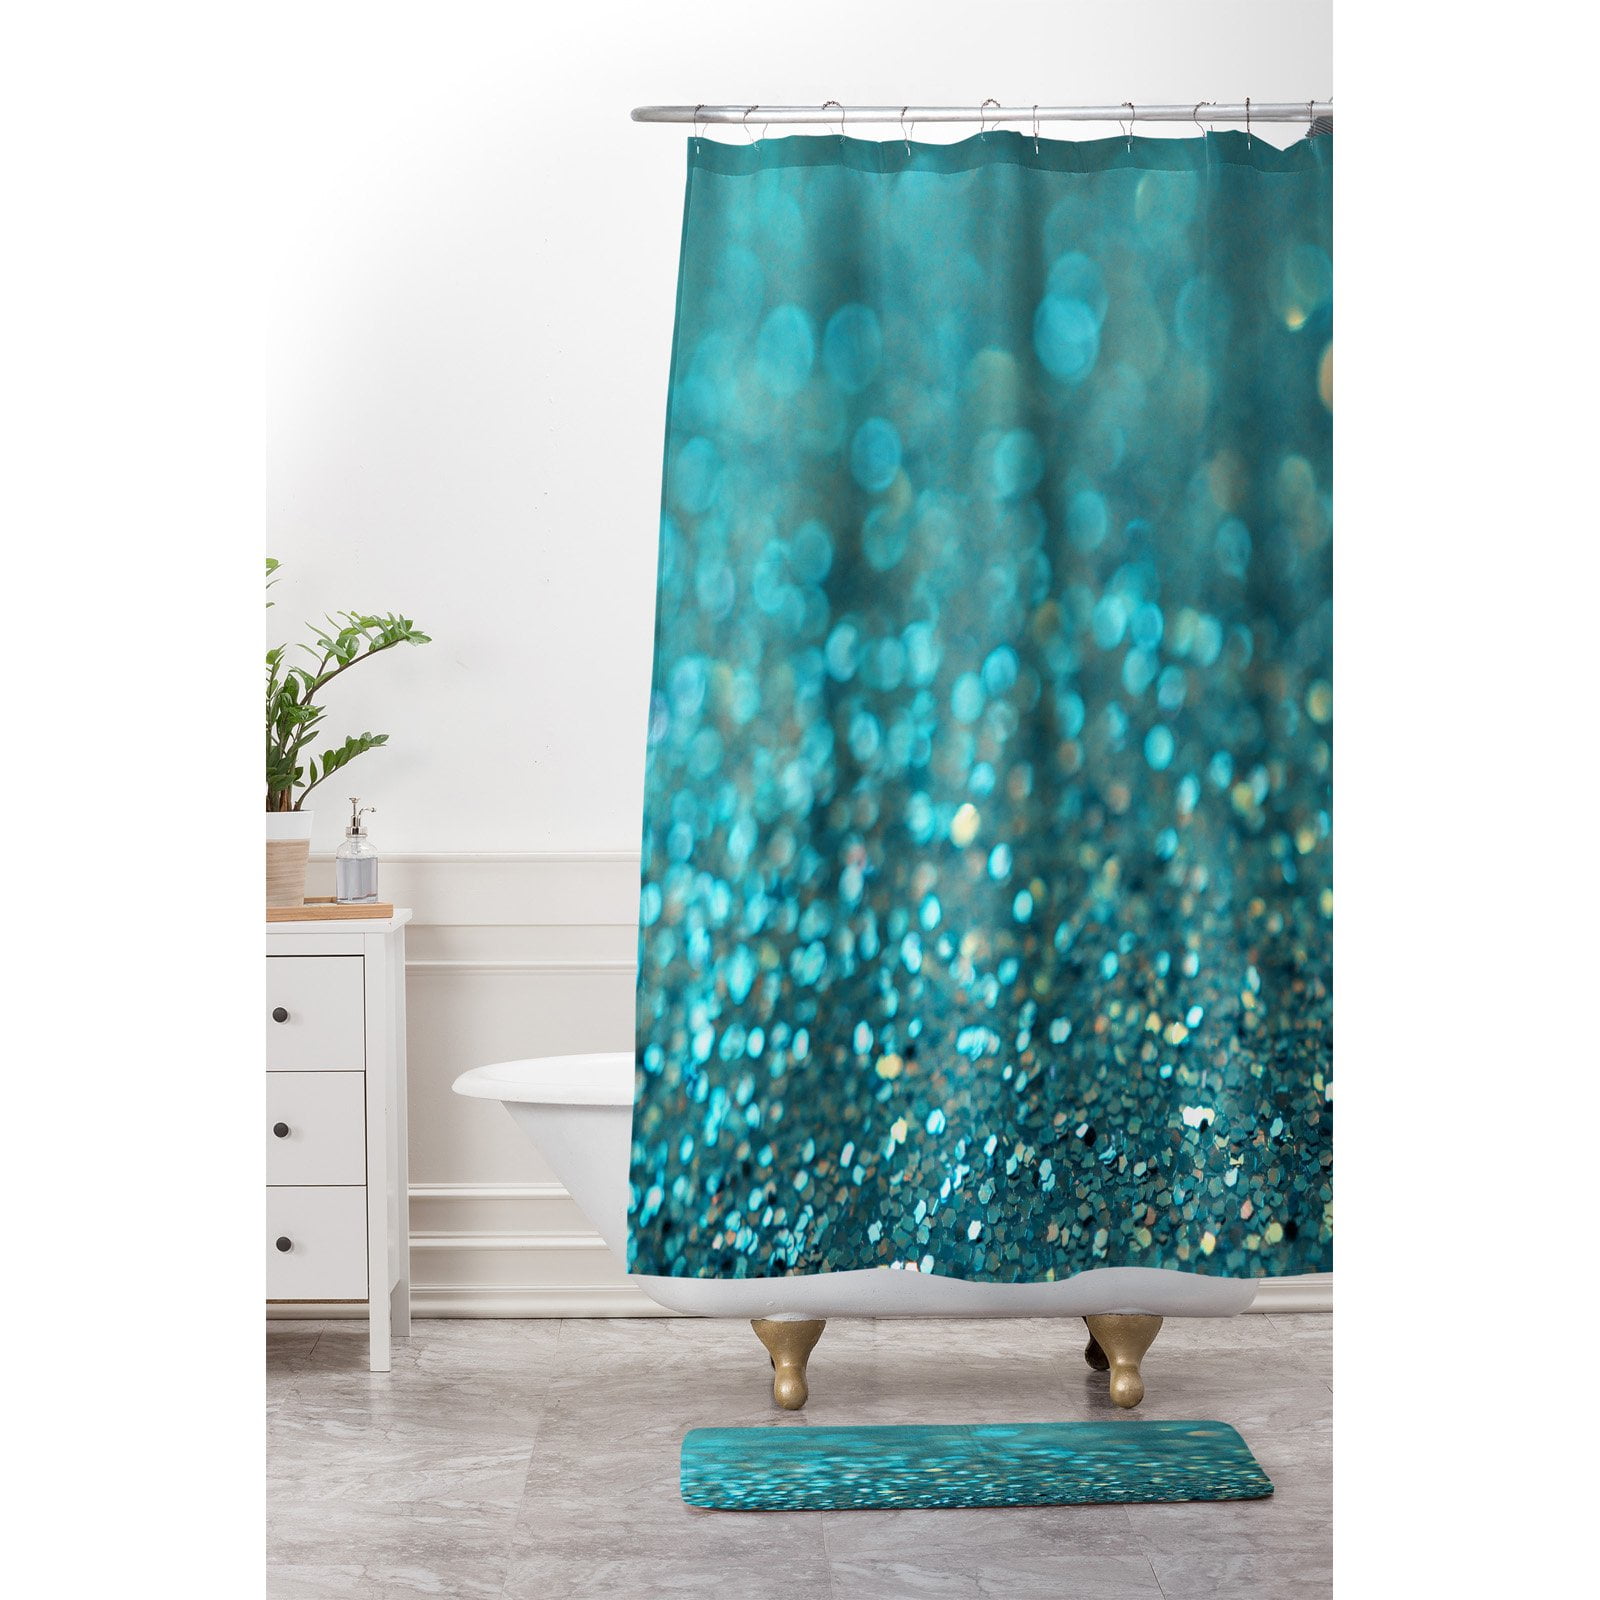 72 x 69 Catherine McDonald Cherry Blossoms in Seoul Deny Designs 2020 Shower Curtain